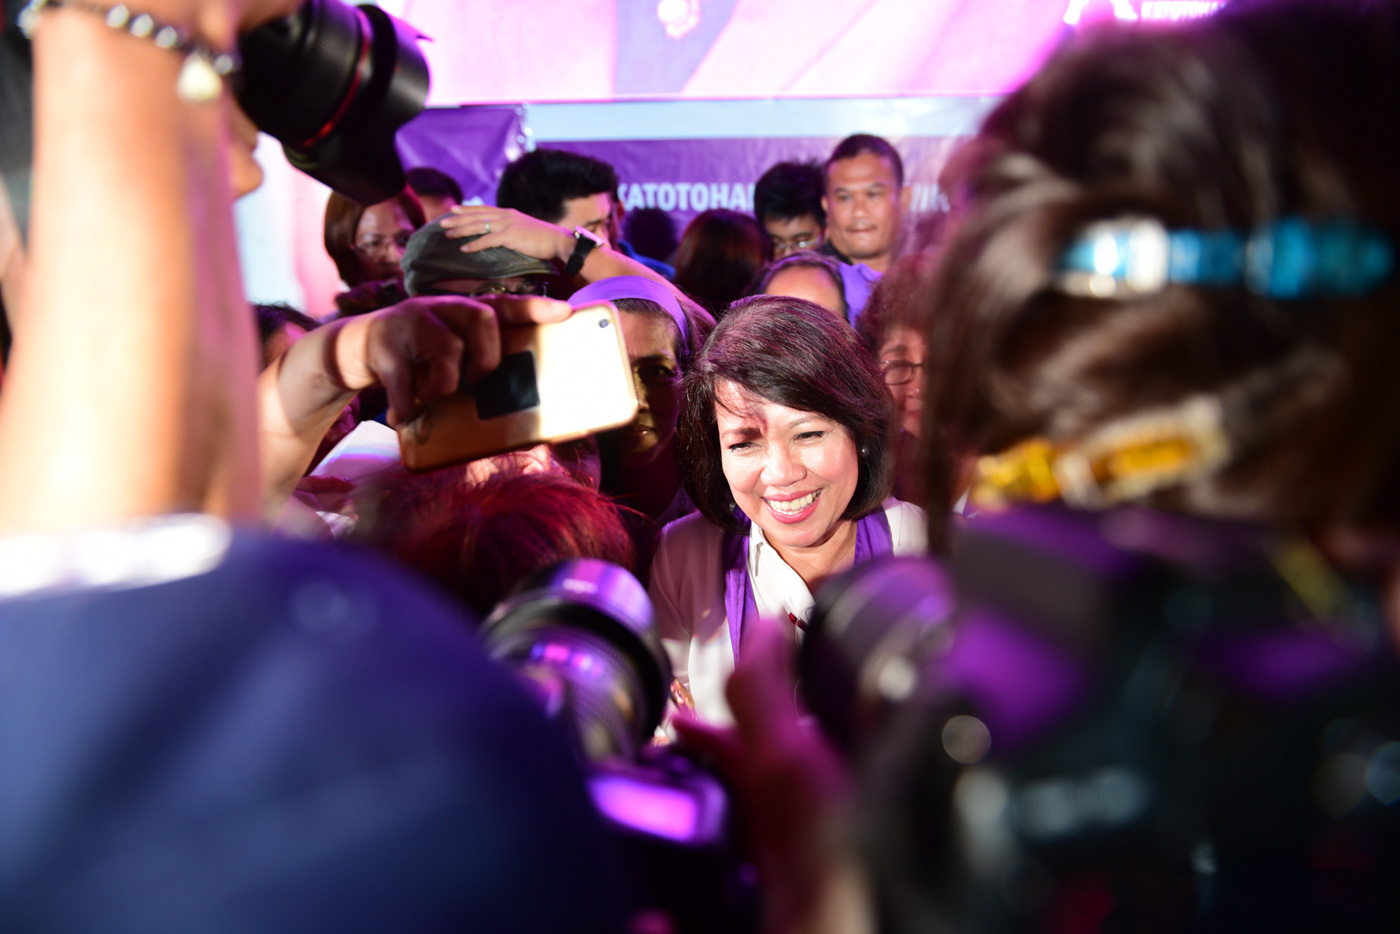 NEXT CHAPTER. Ousted chief justice Maria Lourdes Sereno faces the next chapter of her public life, but with unsolved problems that continue to hound her even outside the Supreme Court. File photo by Maria Tan/Rappler 